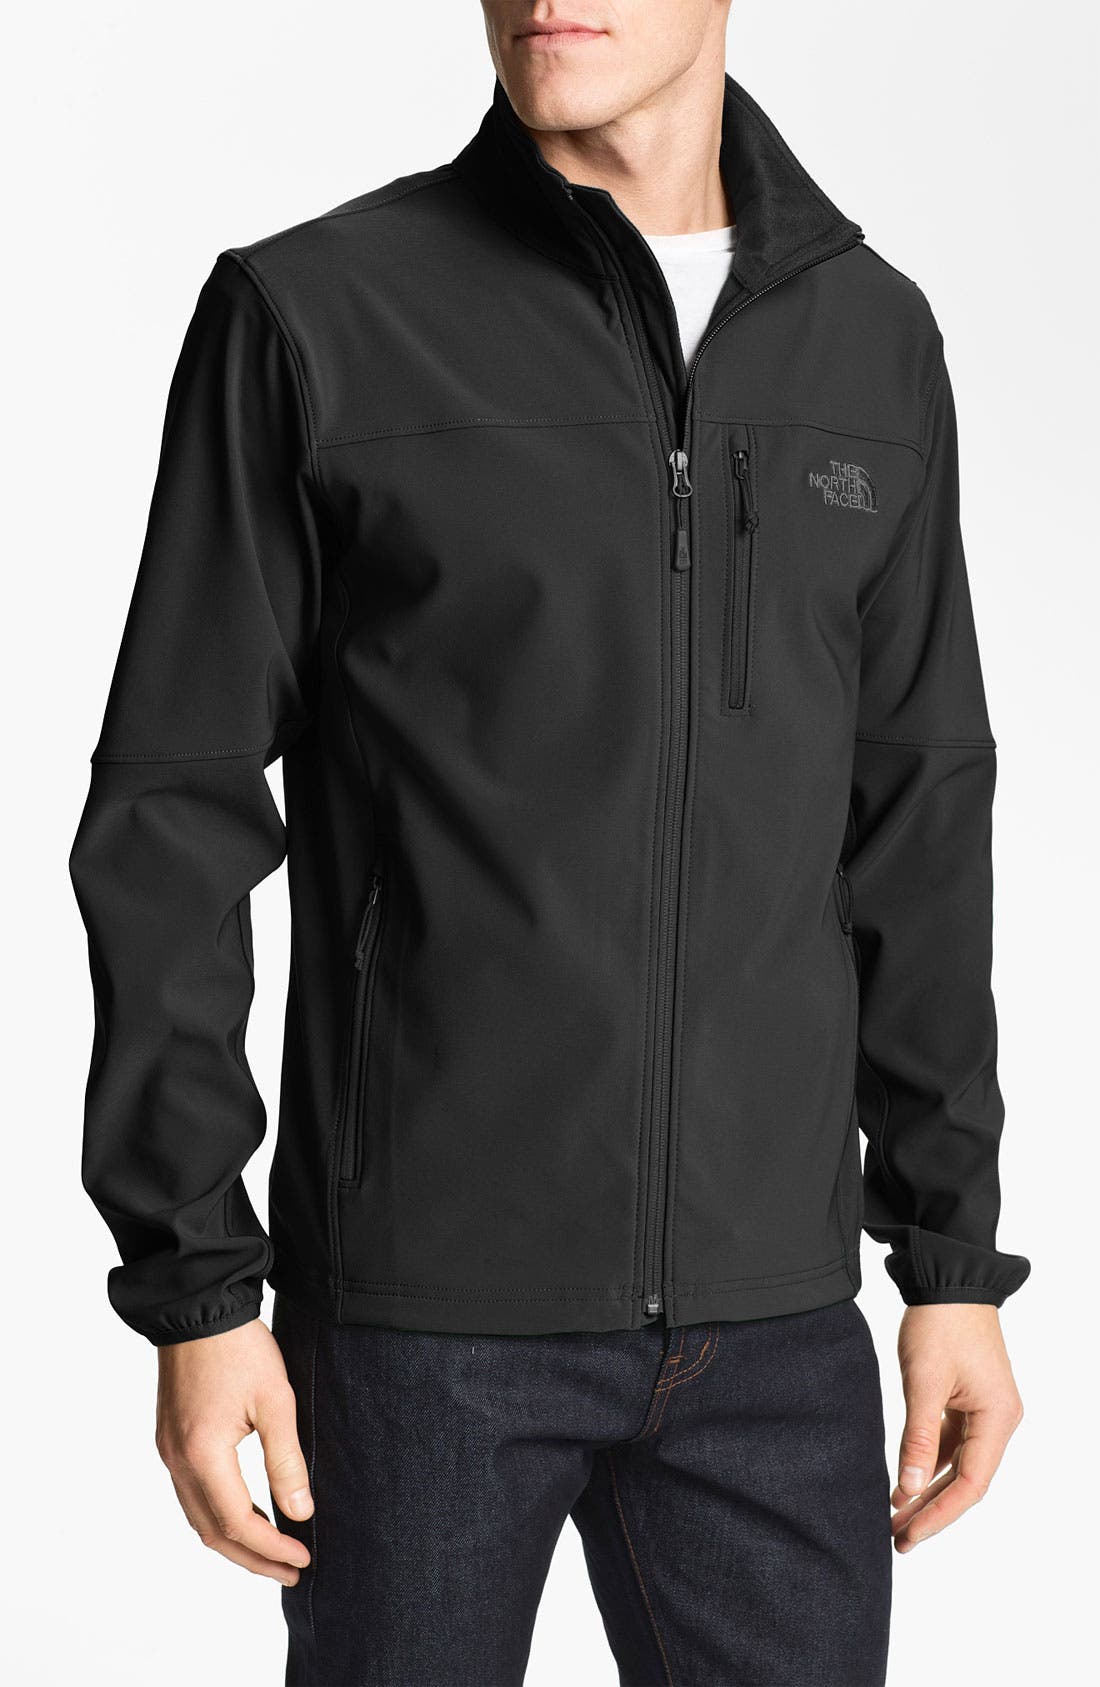 the north face apex pneumatic jacket